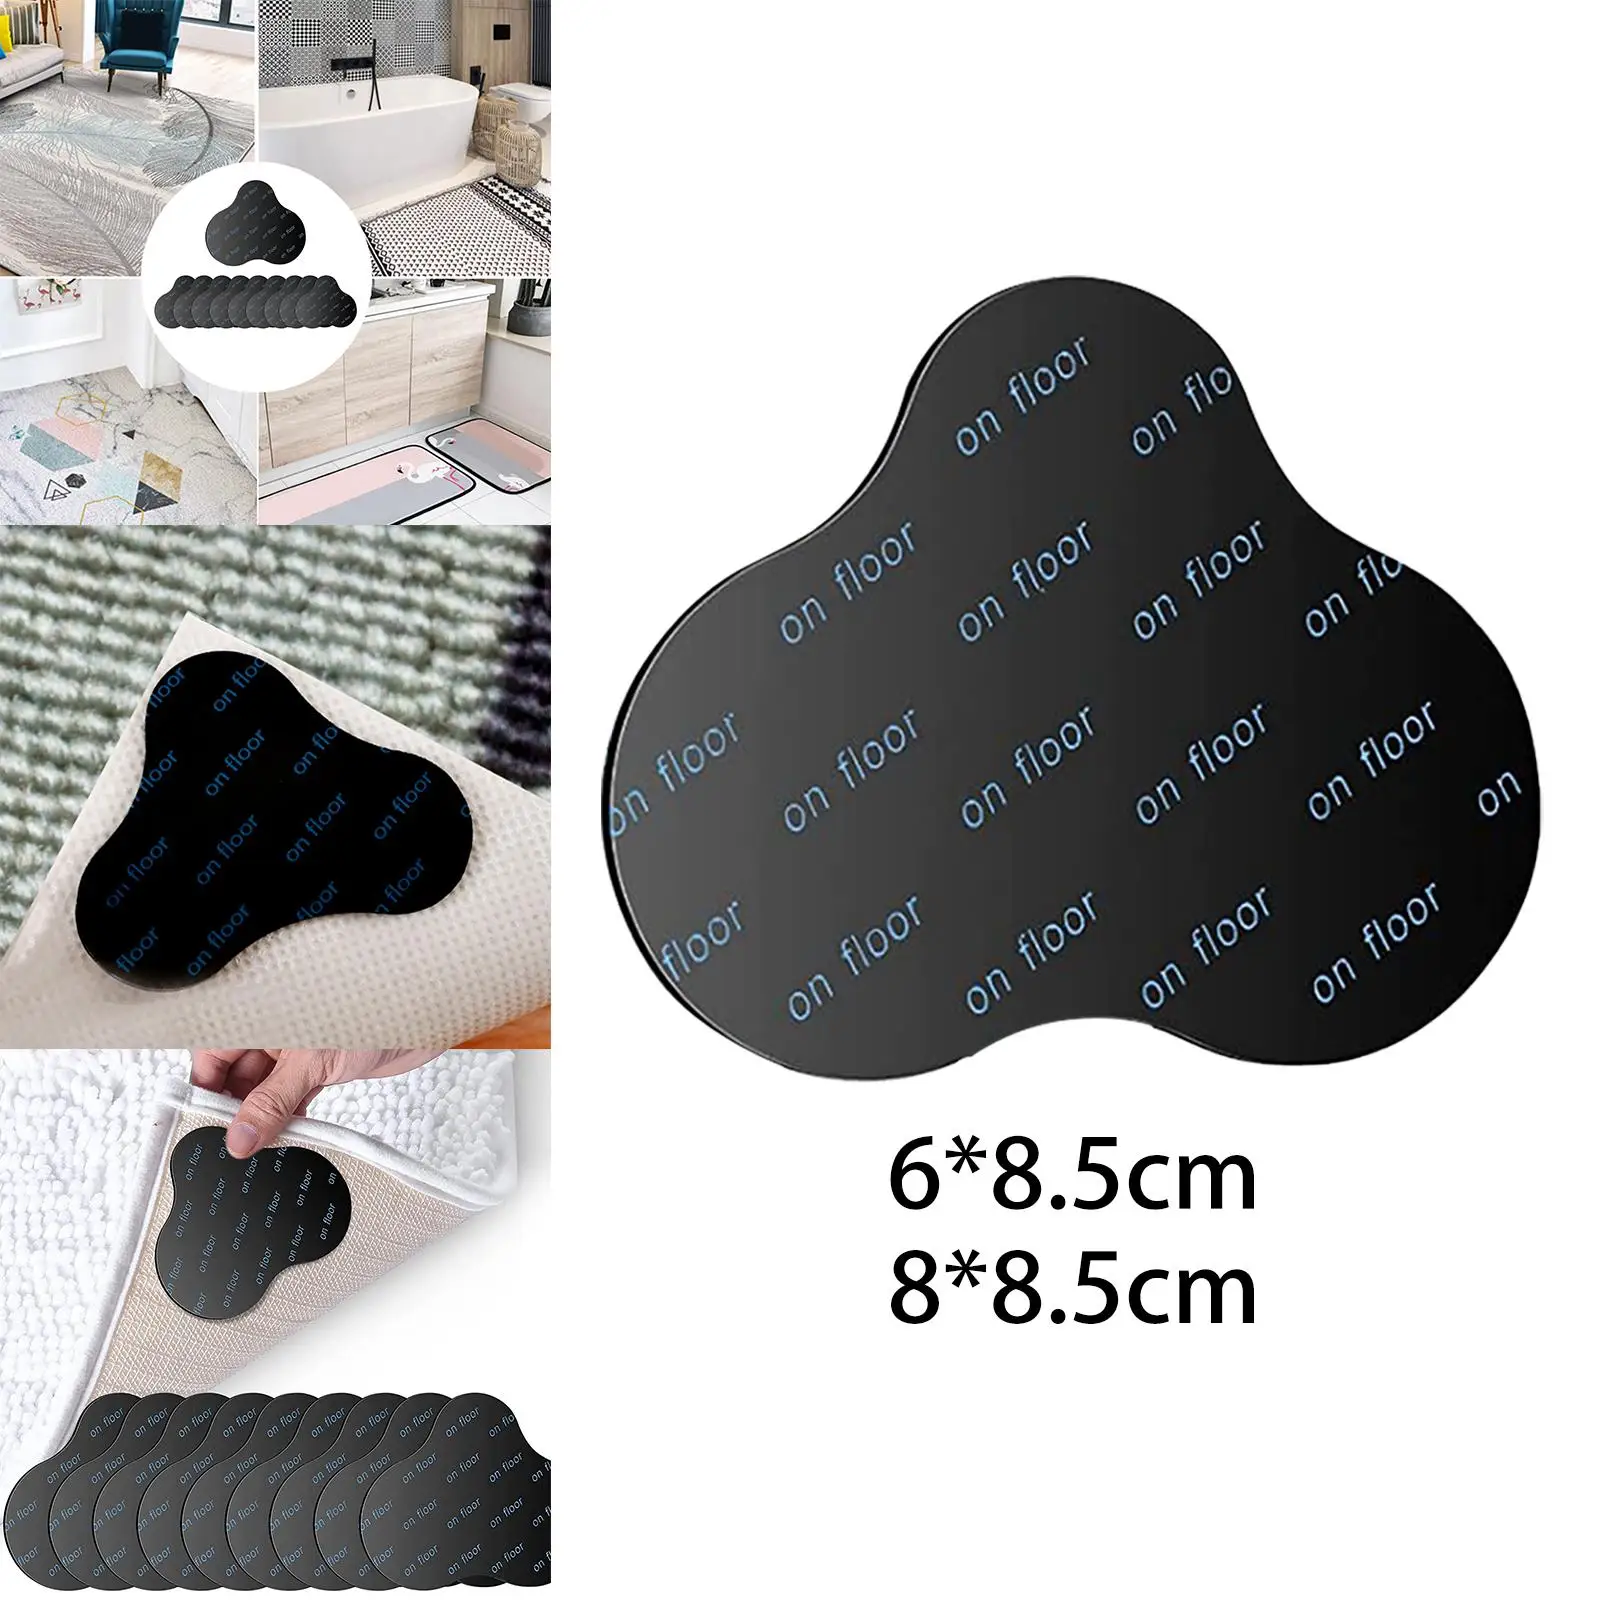 10 Pieces Non Slip Grippers for Rug Washable Carpet Gripper for Tile Floors